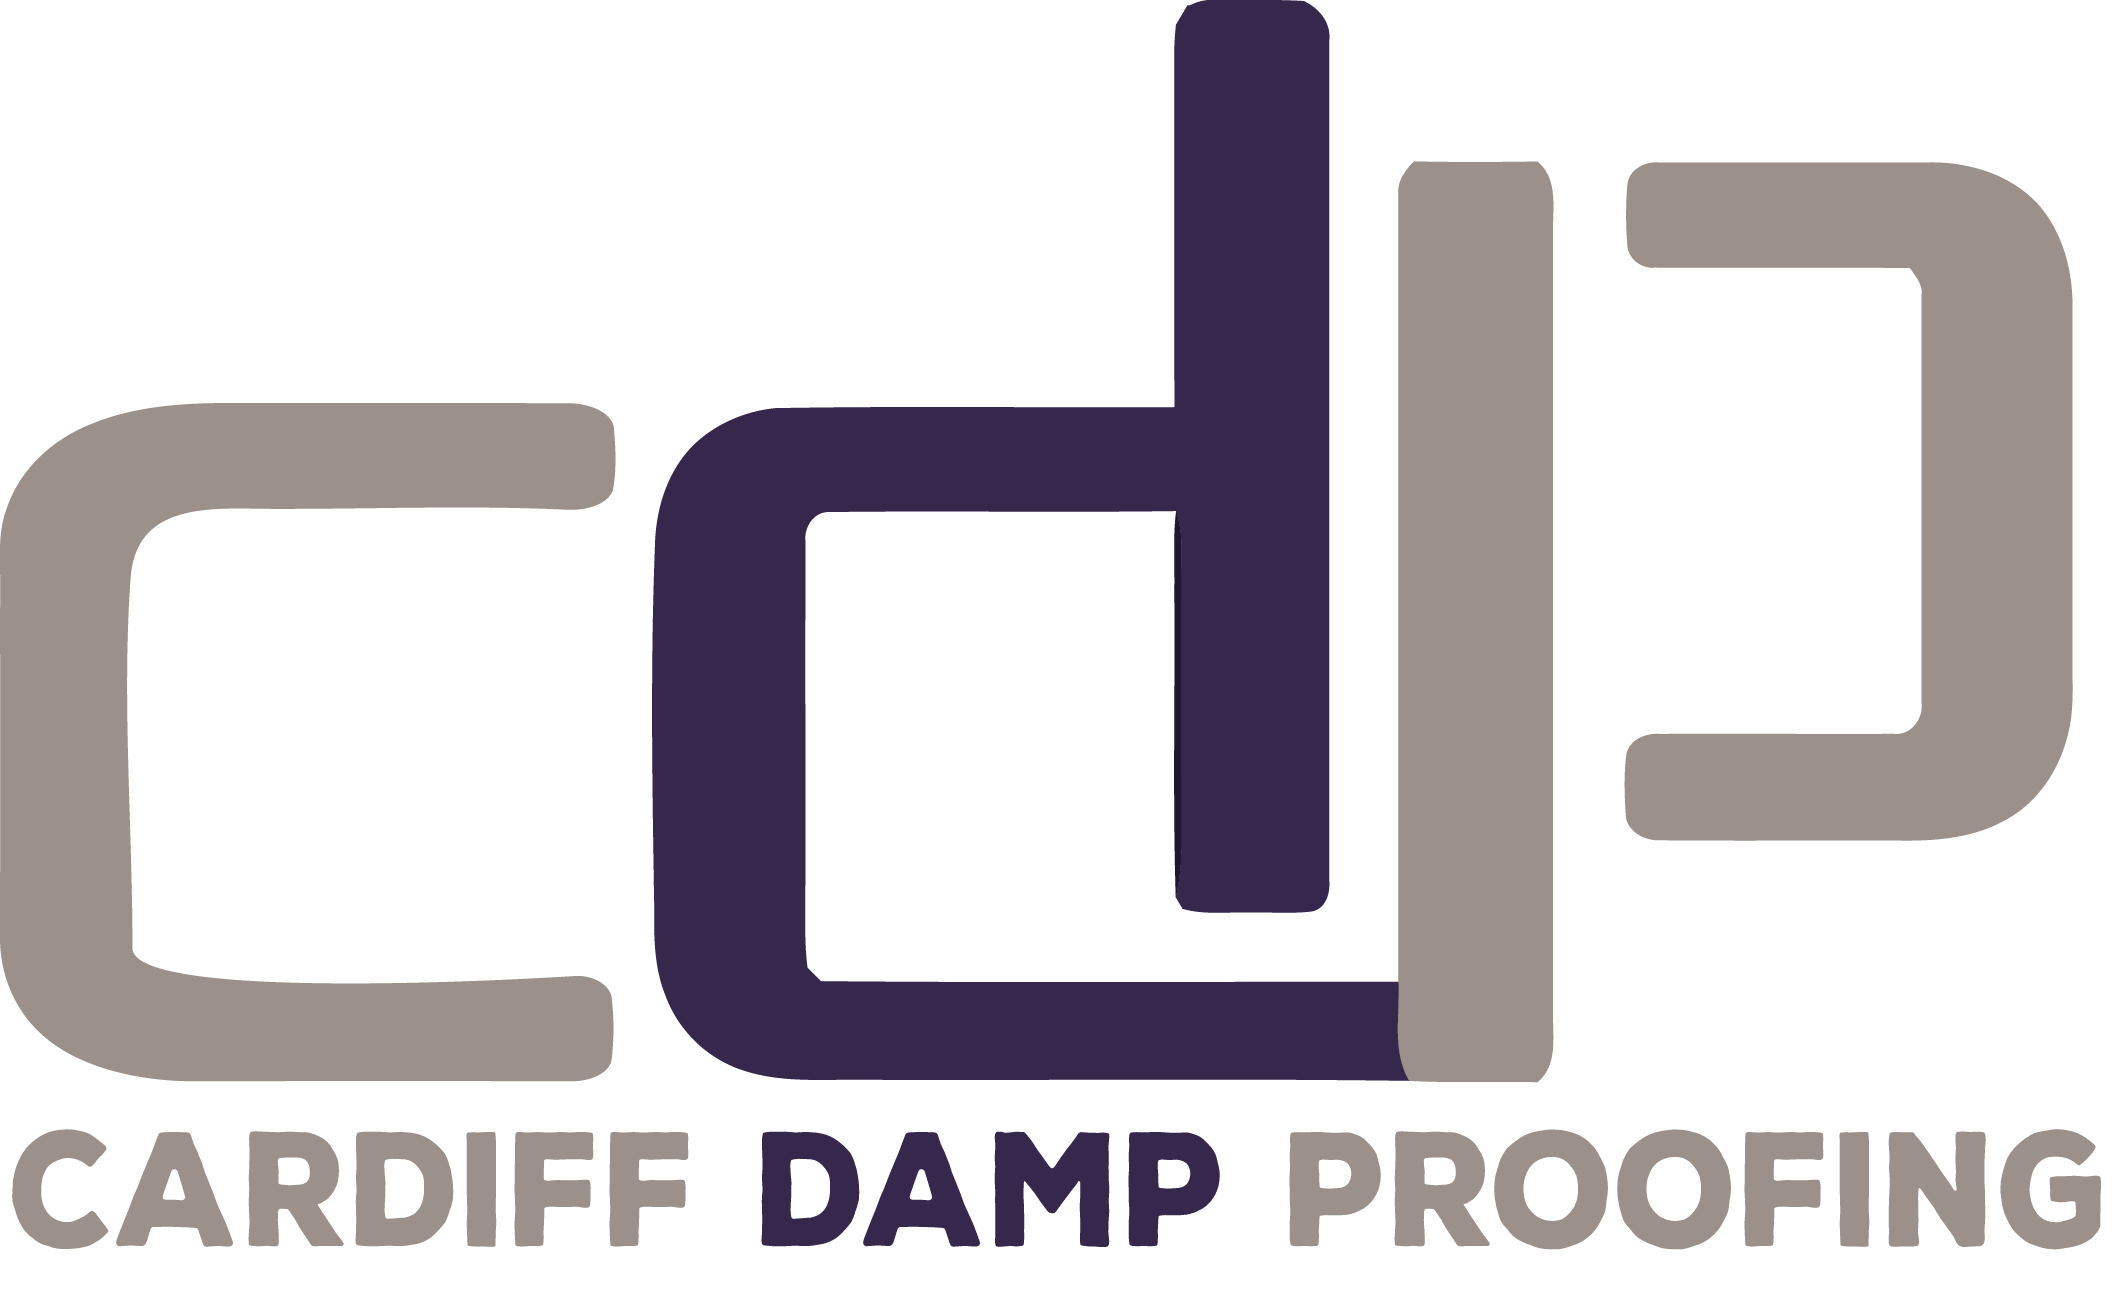 Cardiff Damp Proofing